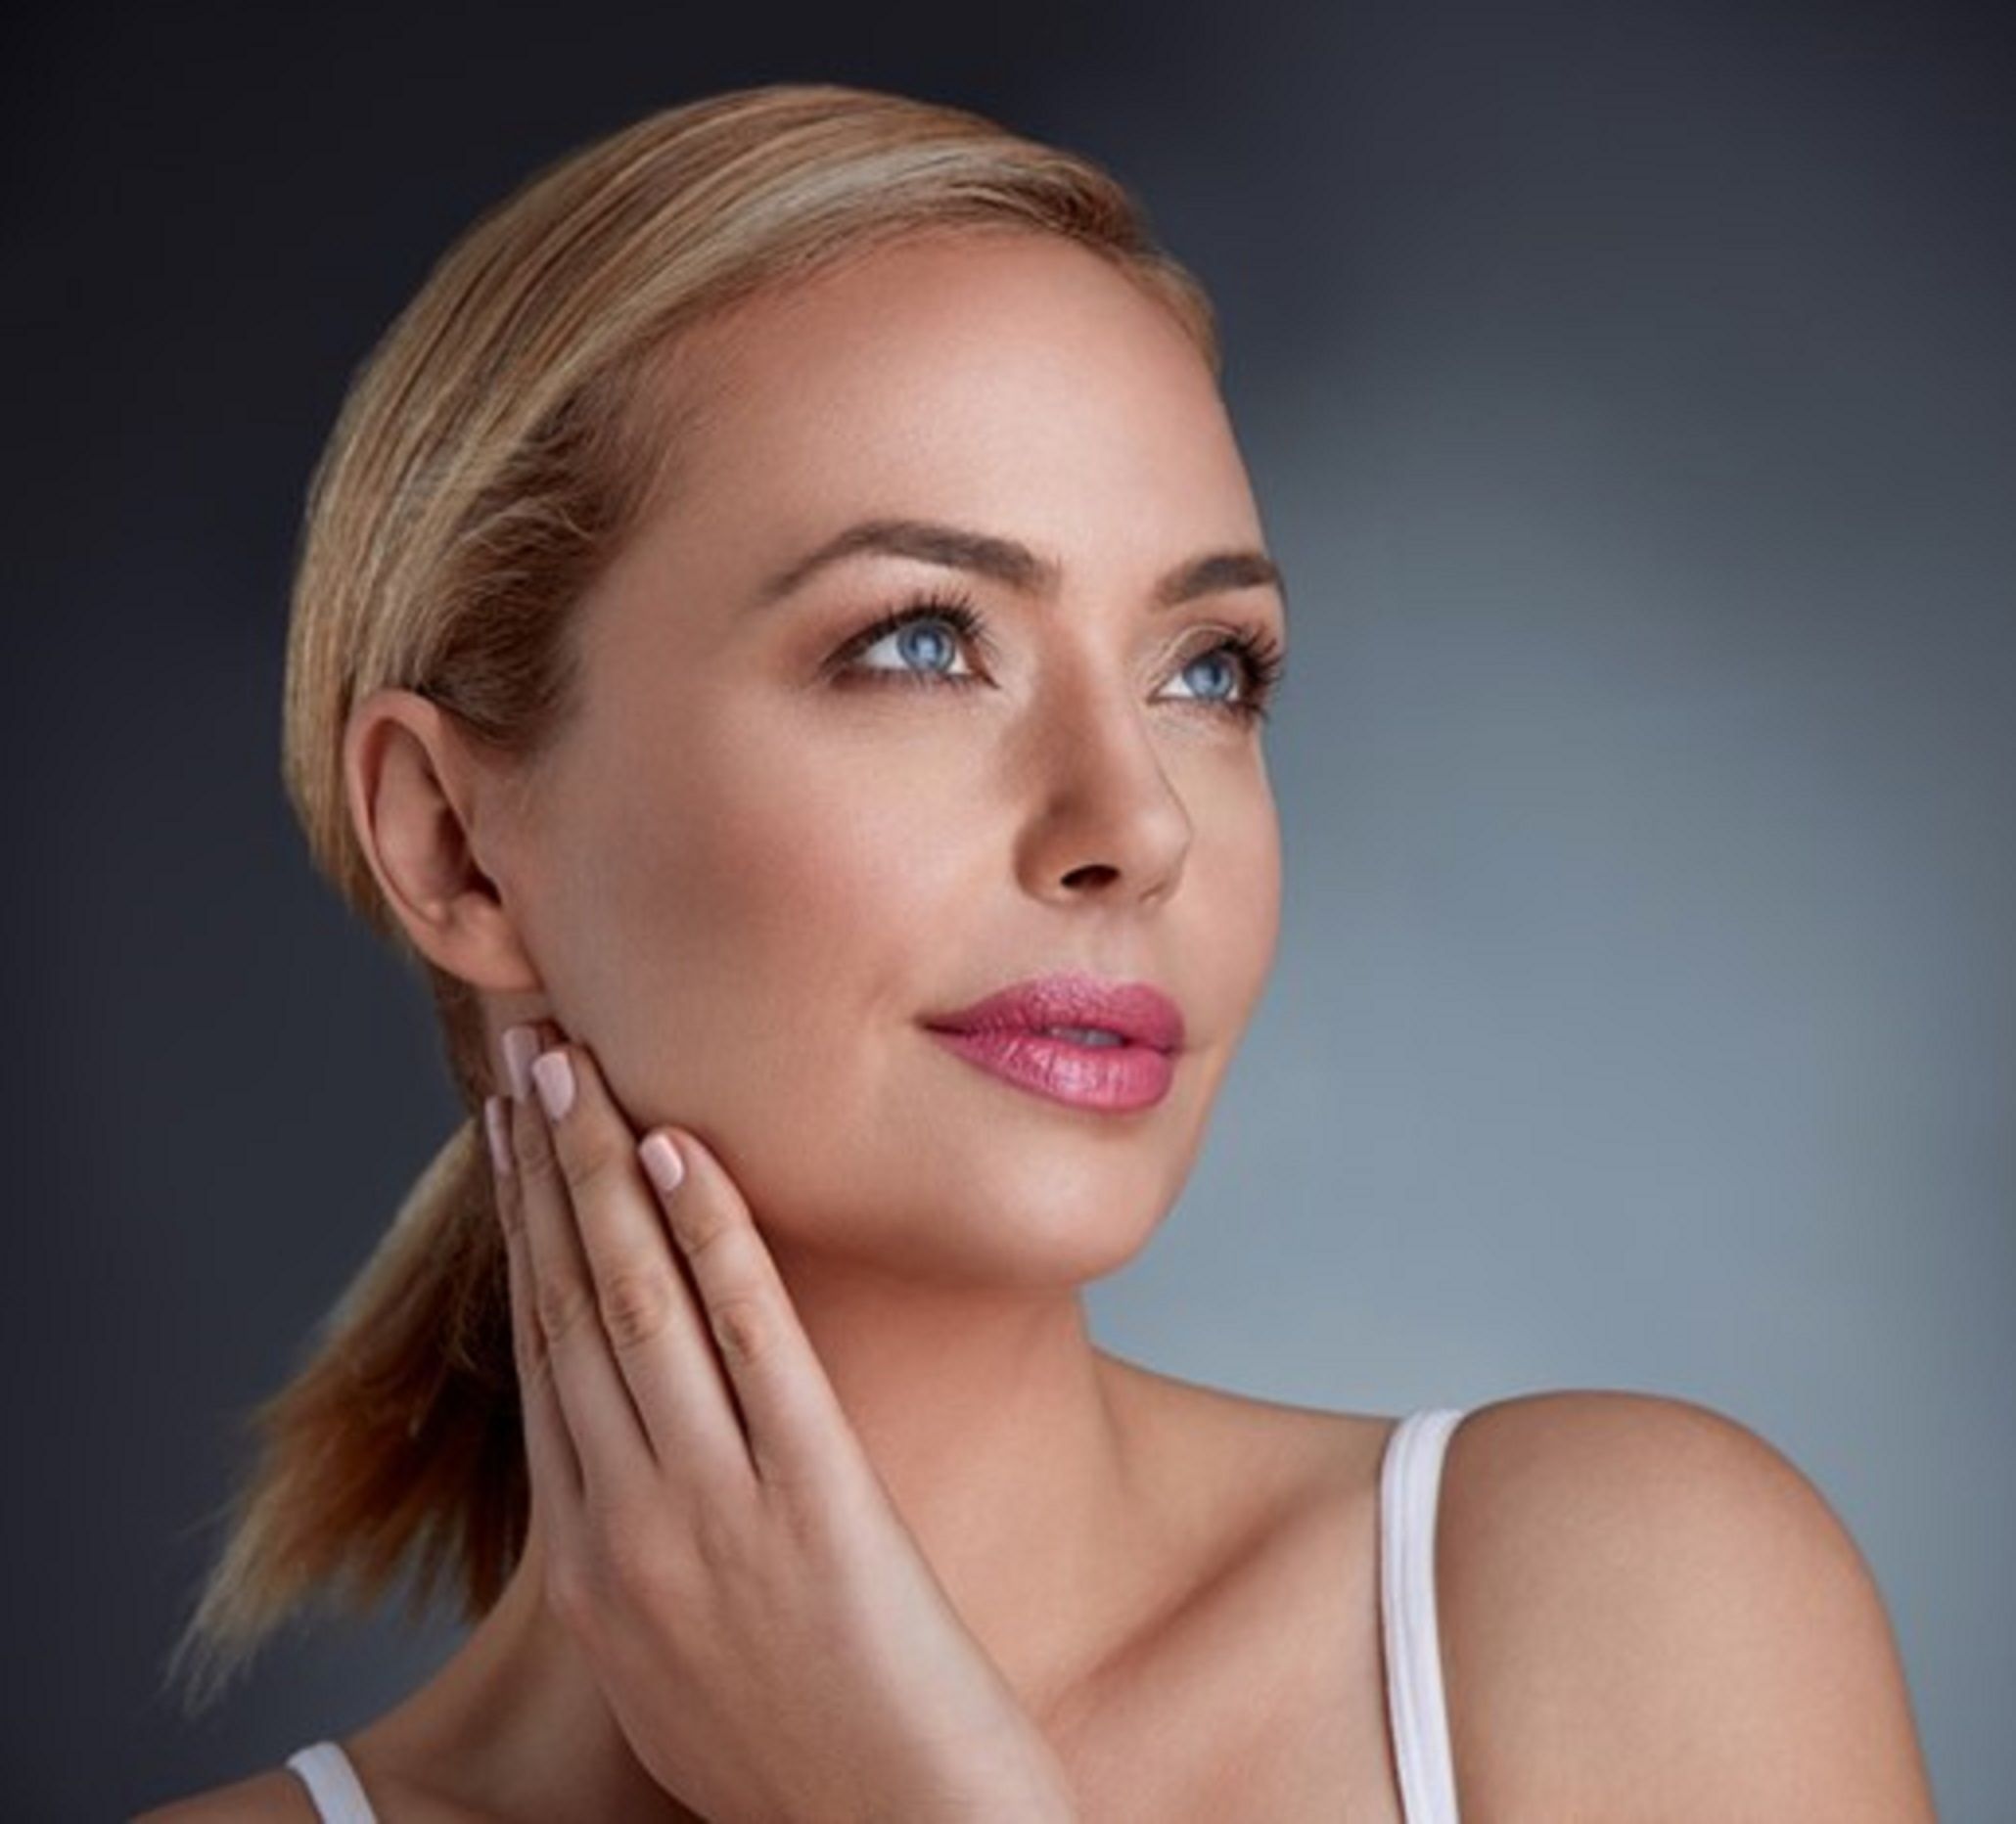 Top 5 Concerns About Facelifts surgery